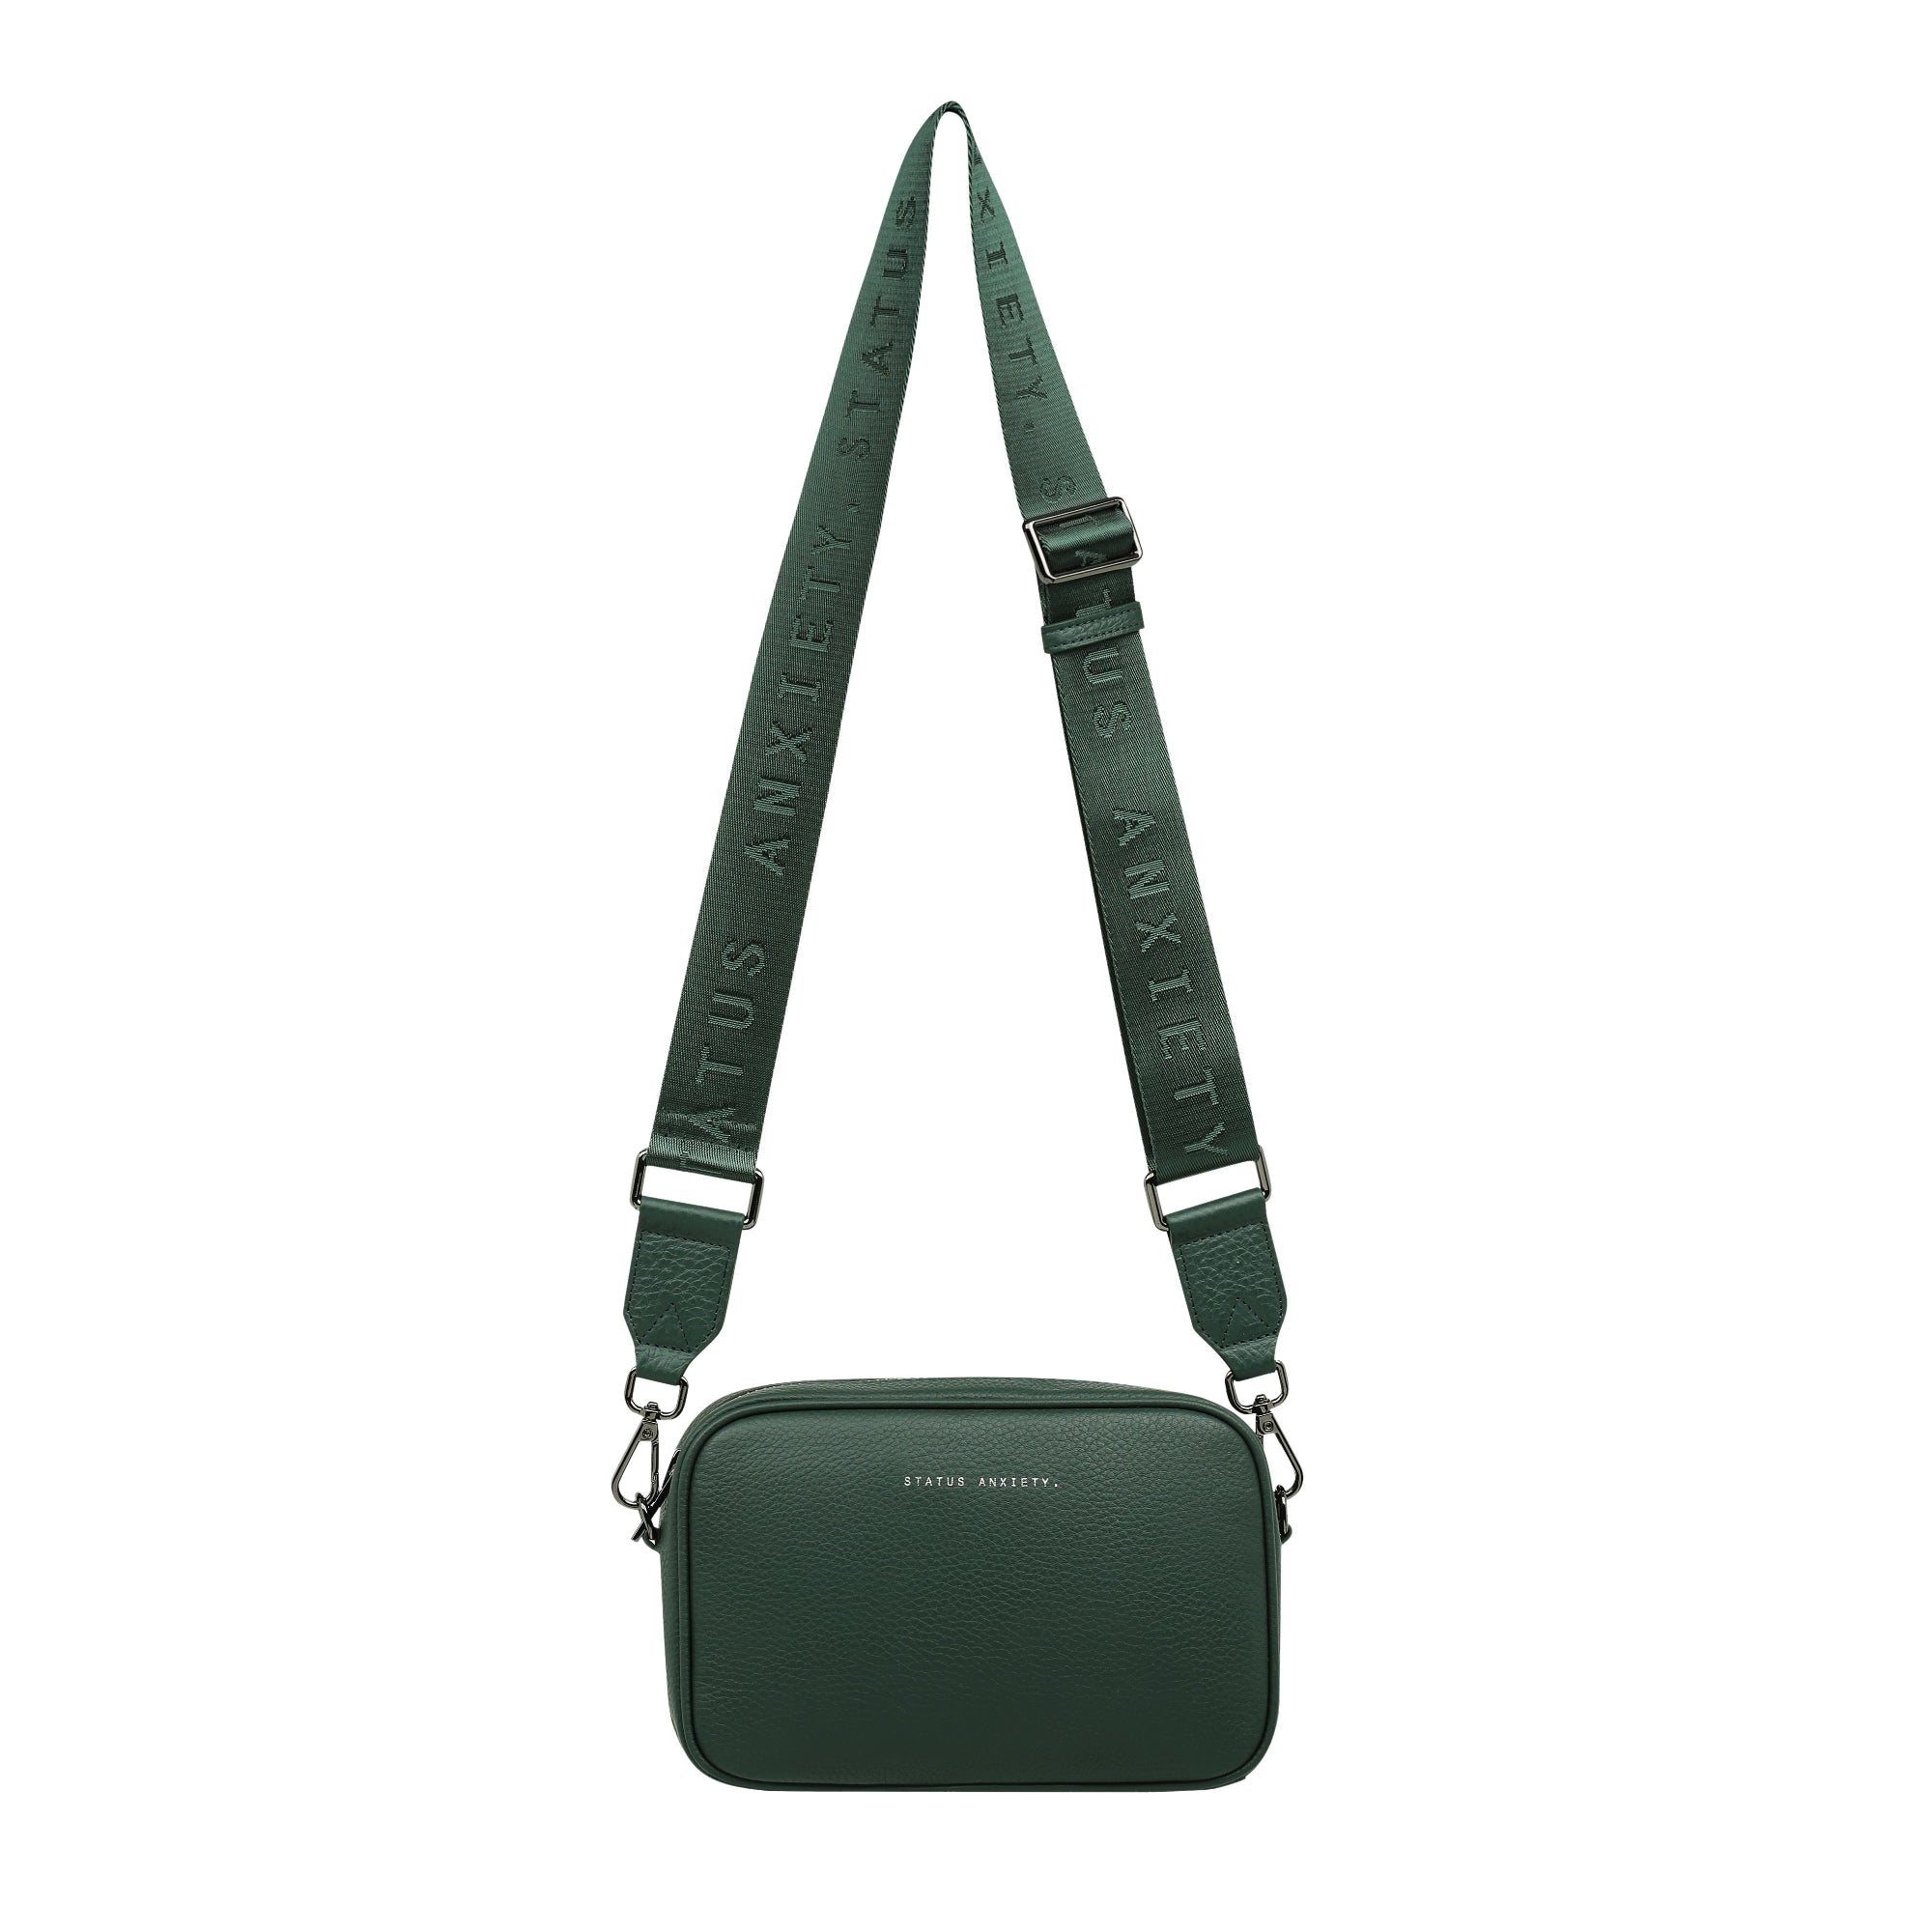 Status Anxiety Plunder with Webbed Strap [COLOUR:Green]